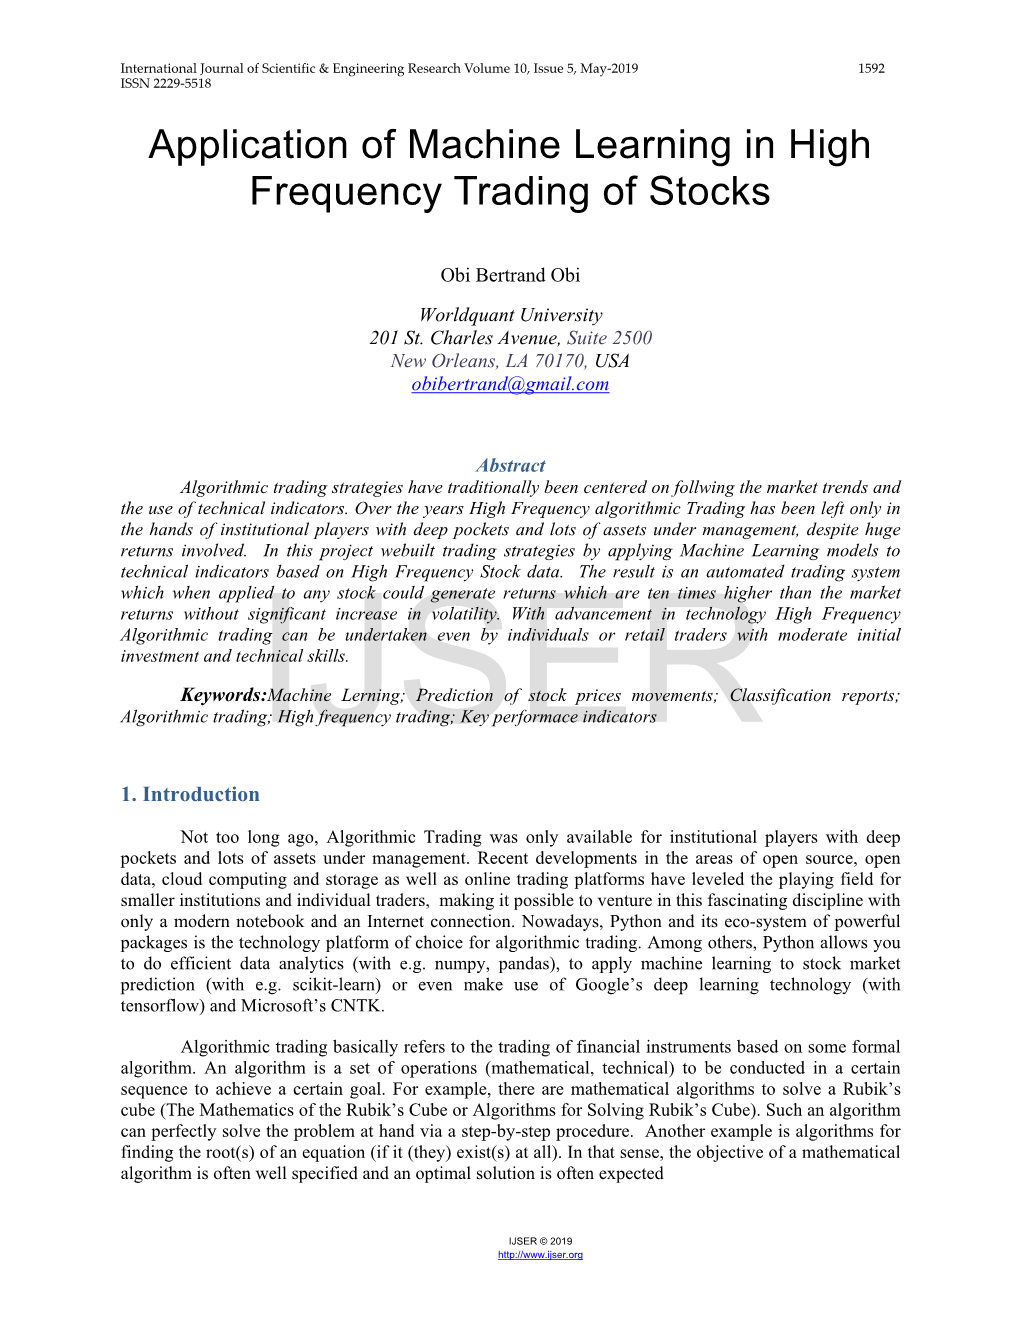 Application of Machine Learning in High Frequency Trading of Stocks